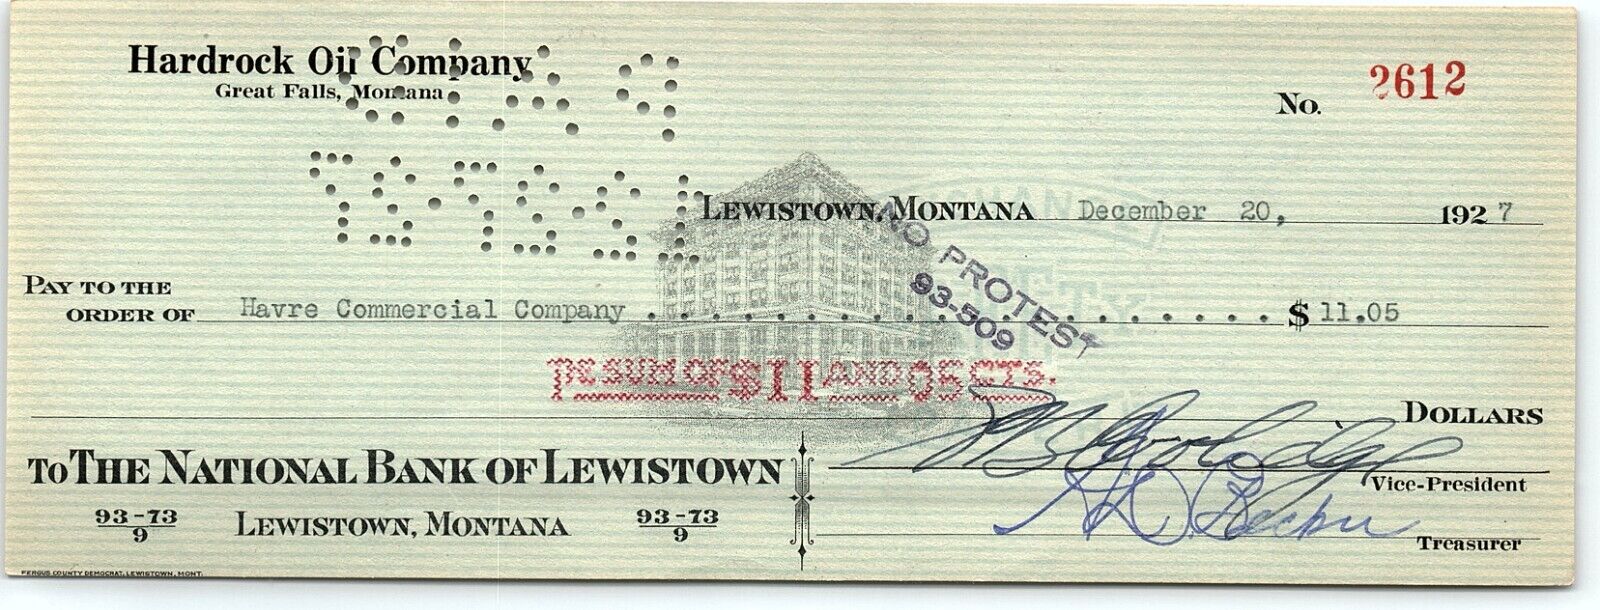 1927 GREAT FALLS MONTANA HARDROCK OIL CO NATIONAL BANK OF LEWISTOWN CHECK Z1598